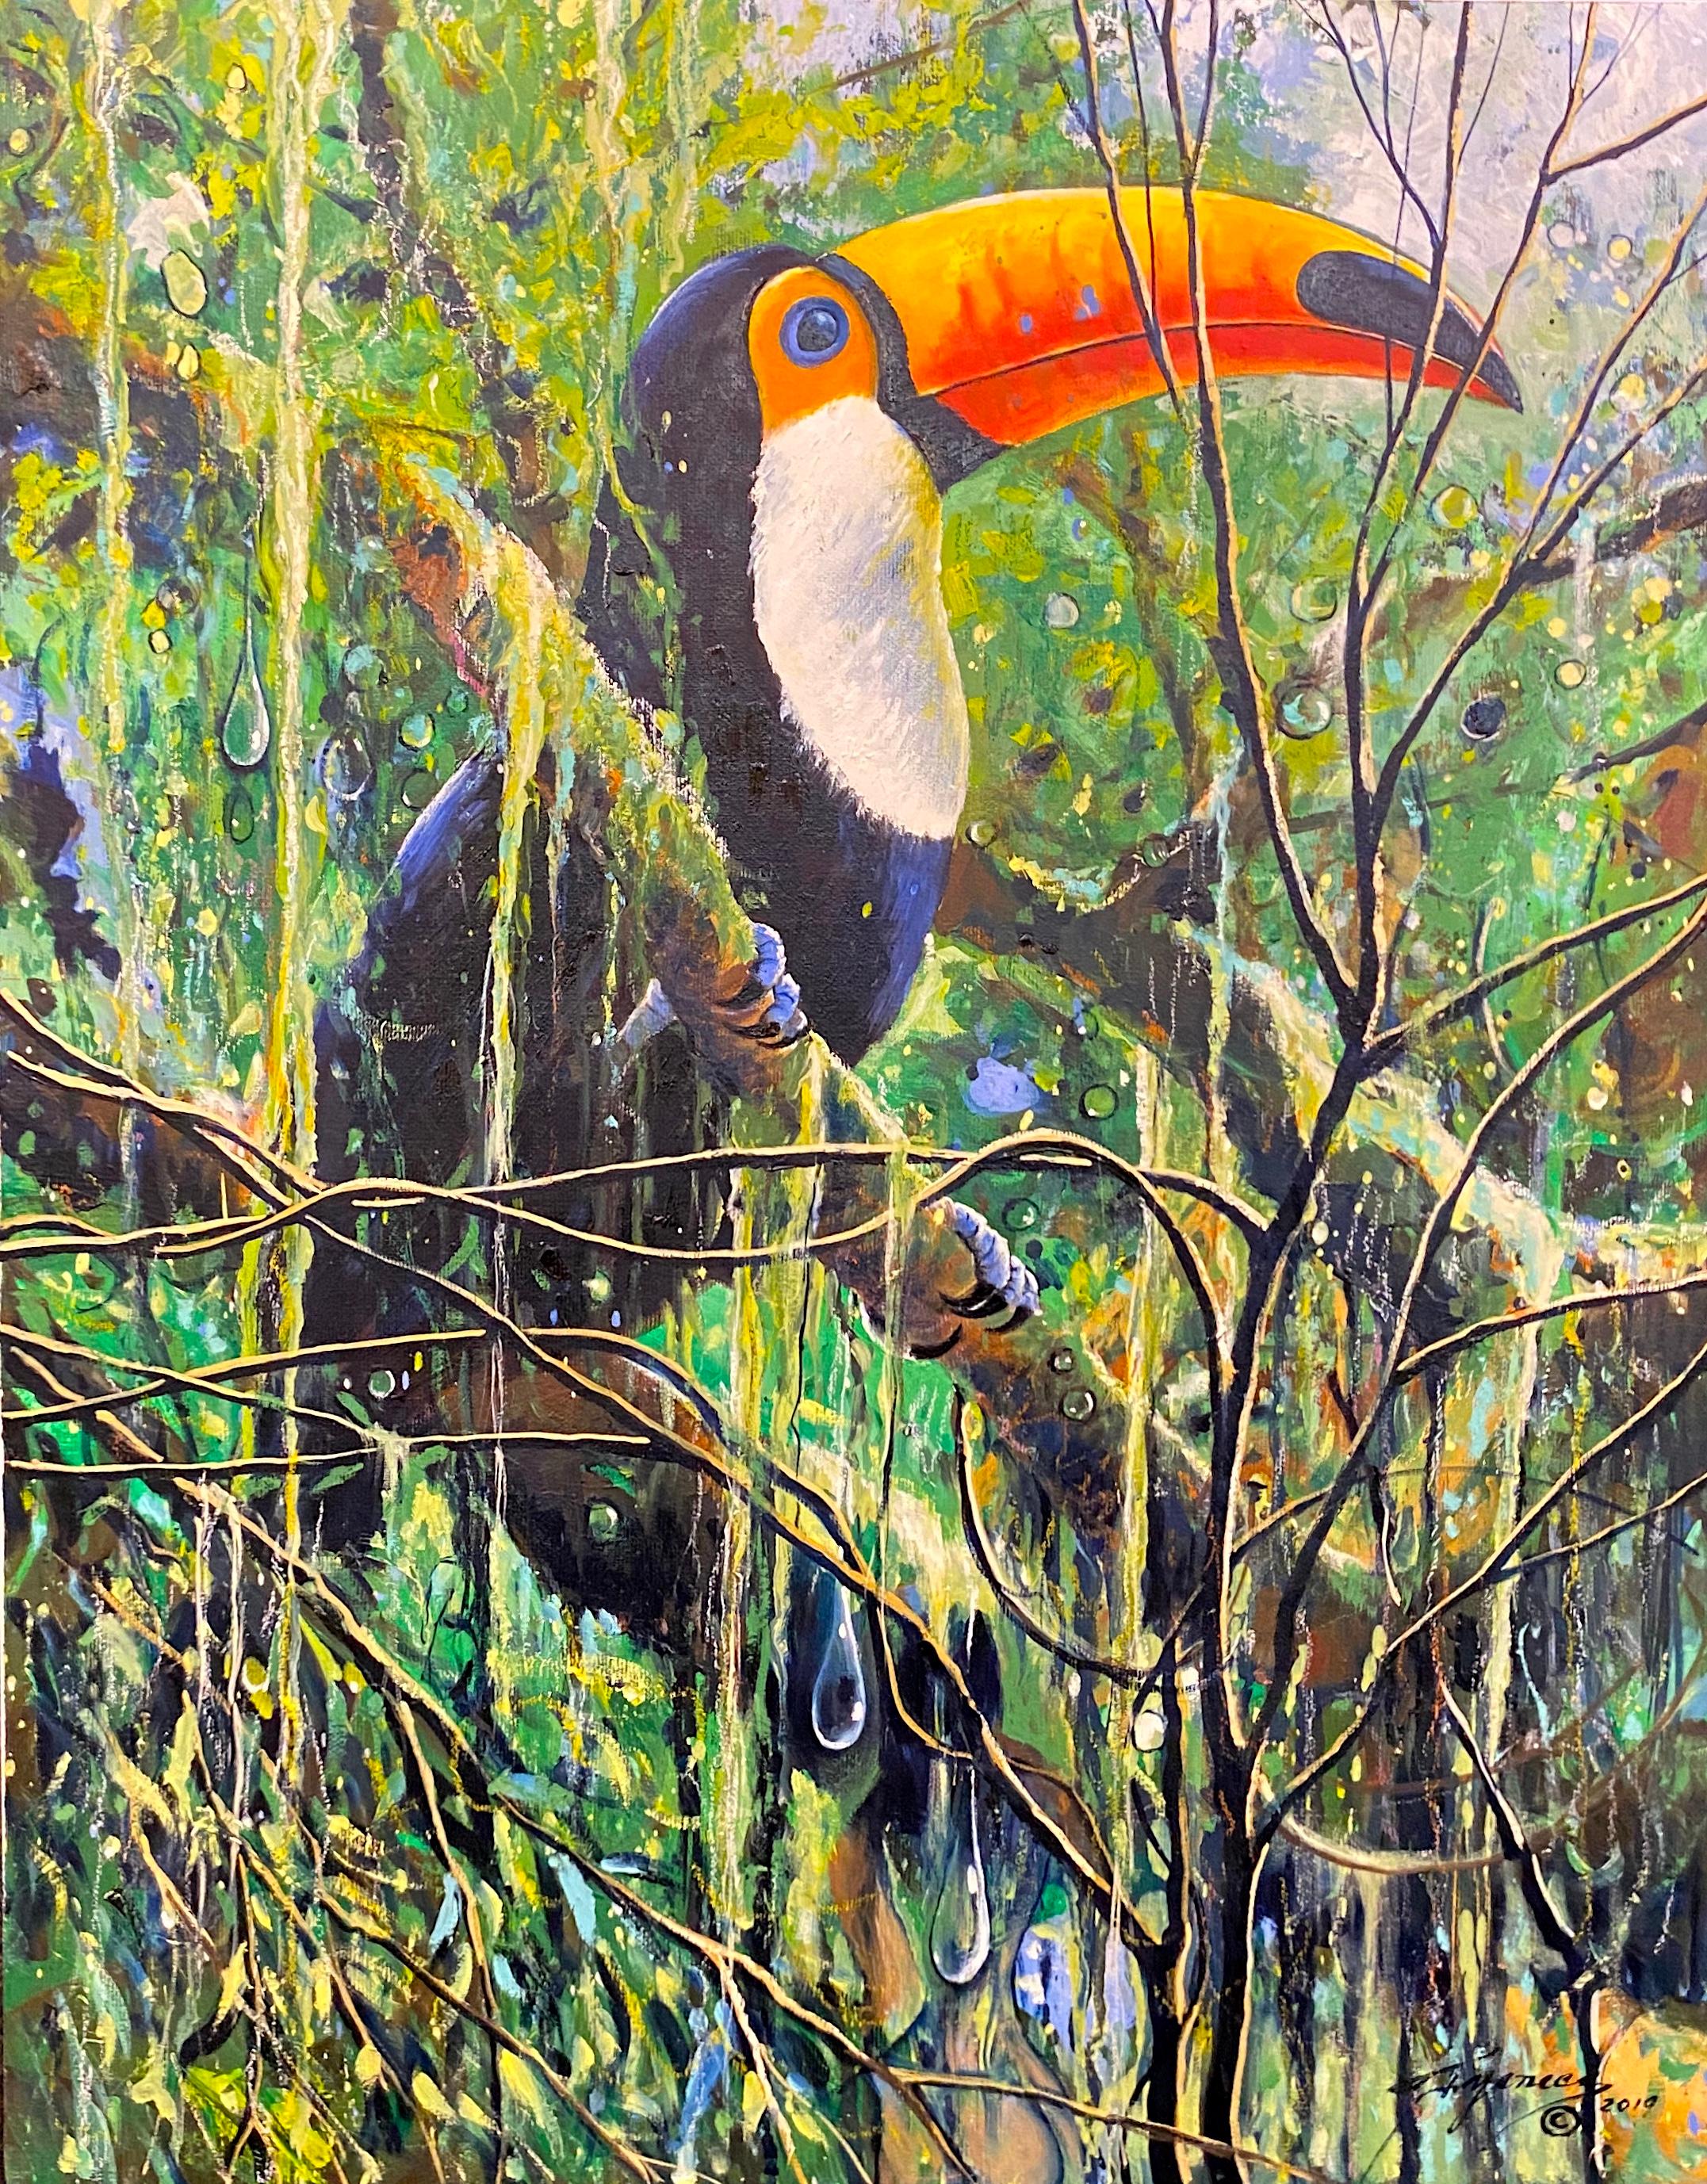 Tucan - Painting by Jorge Yances